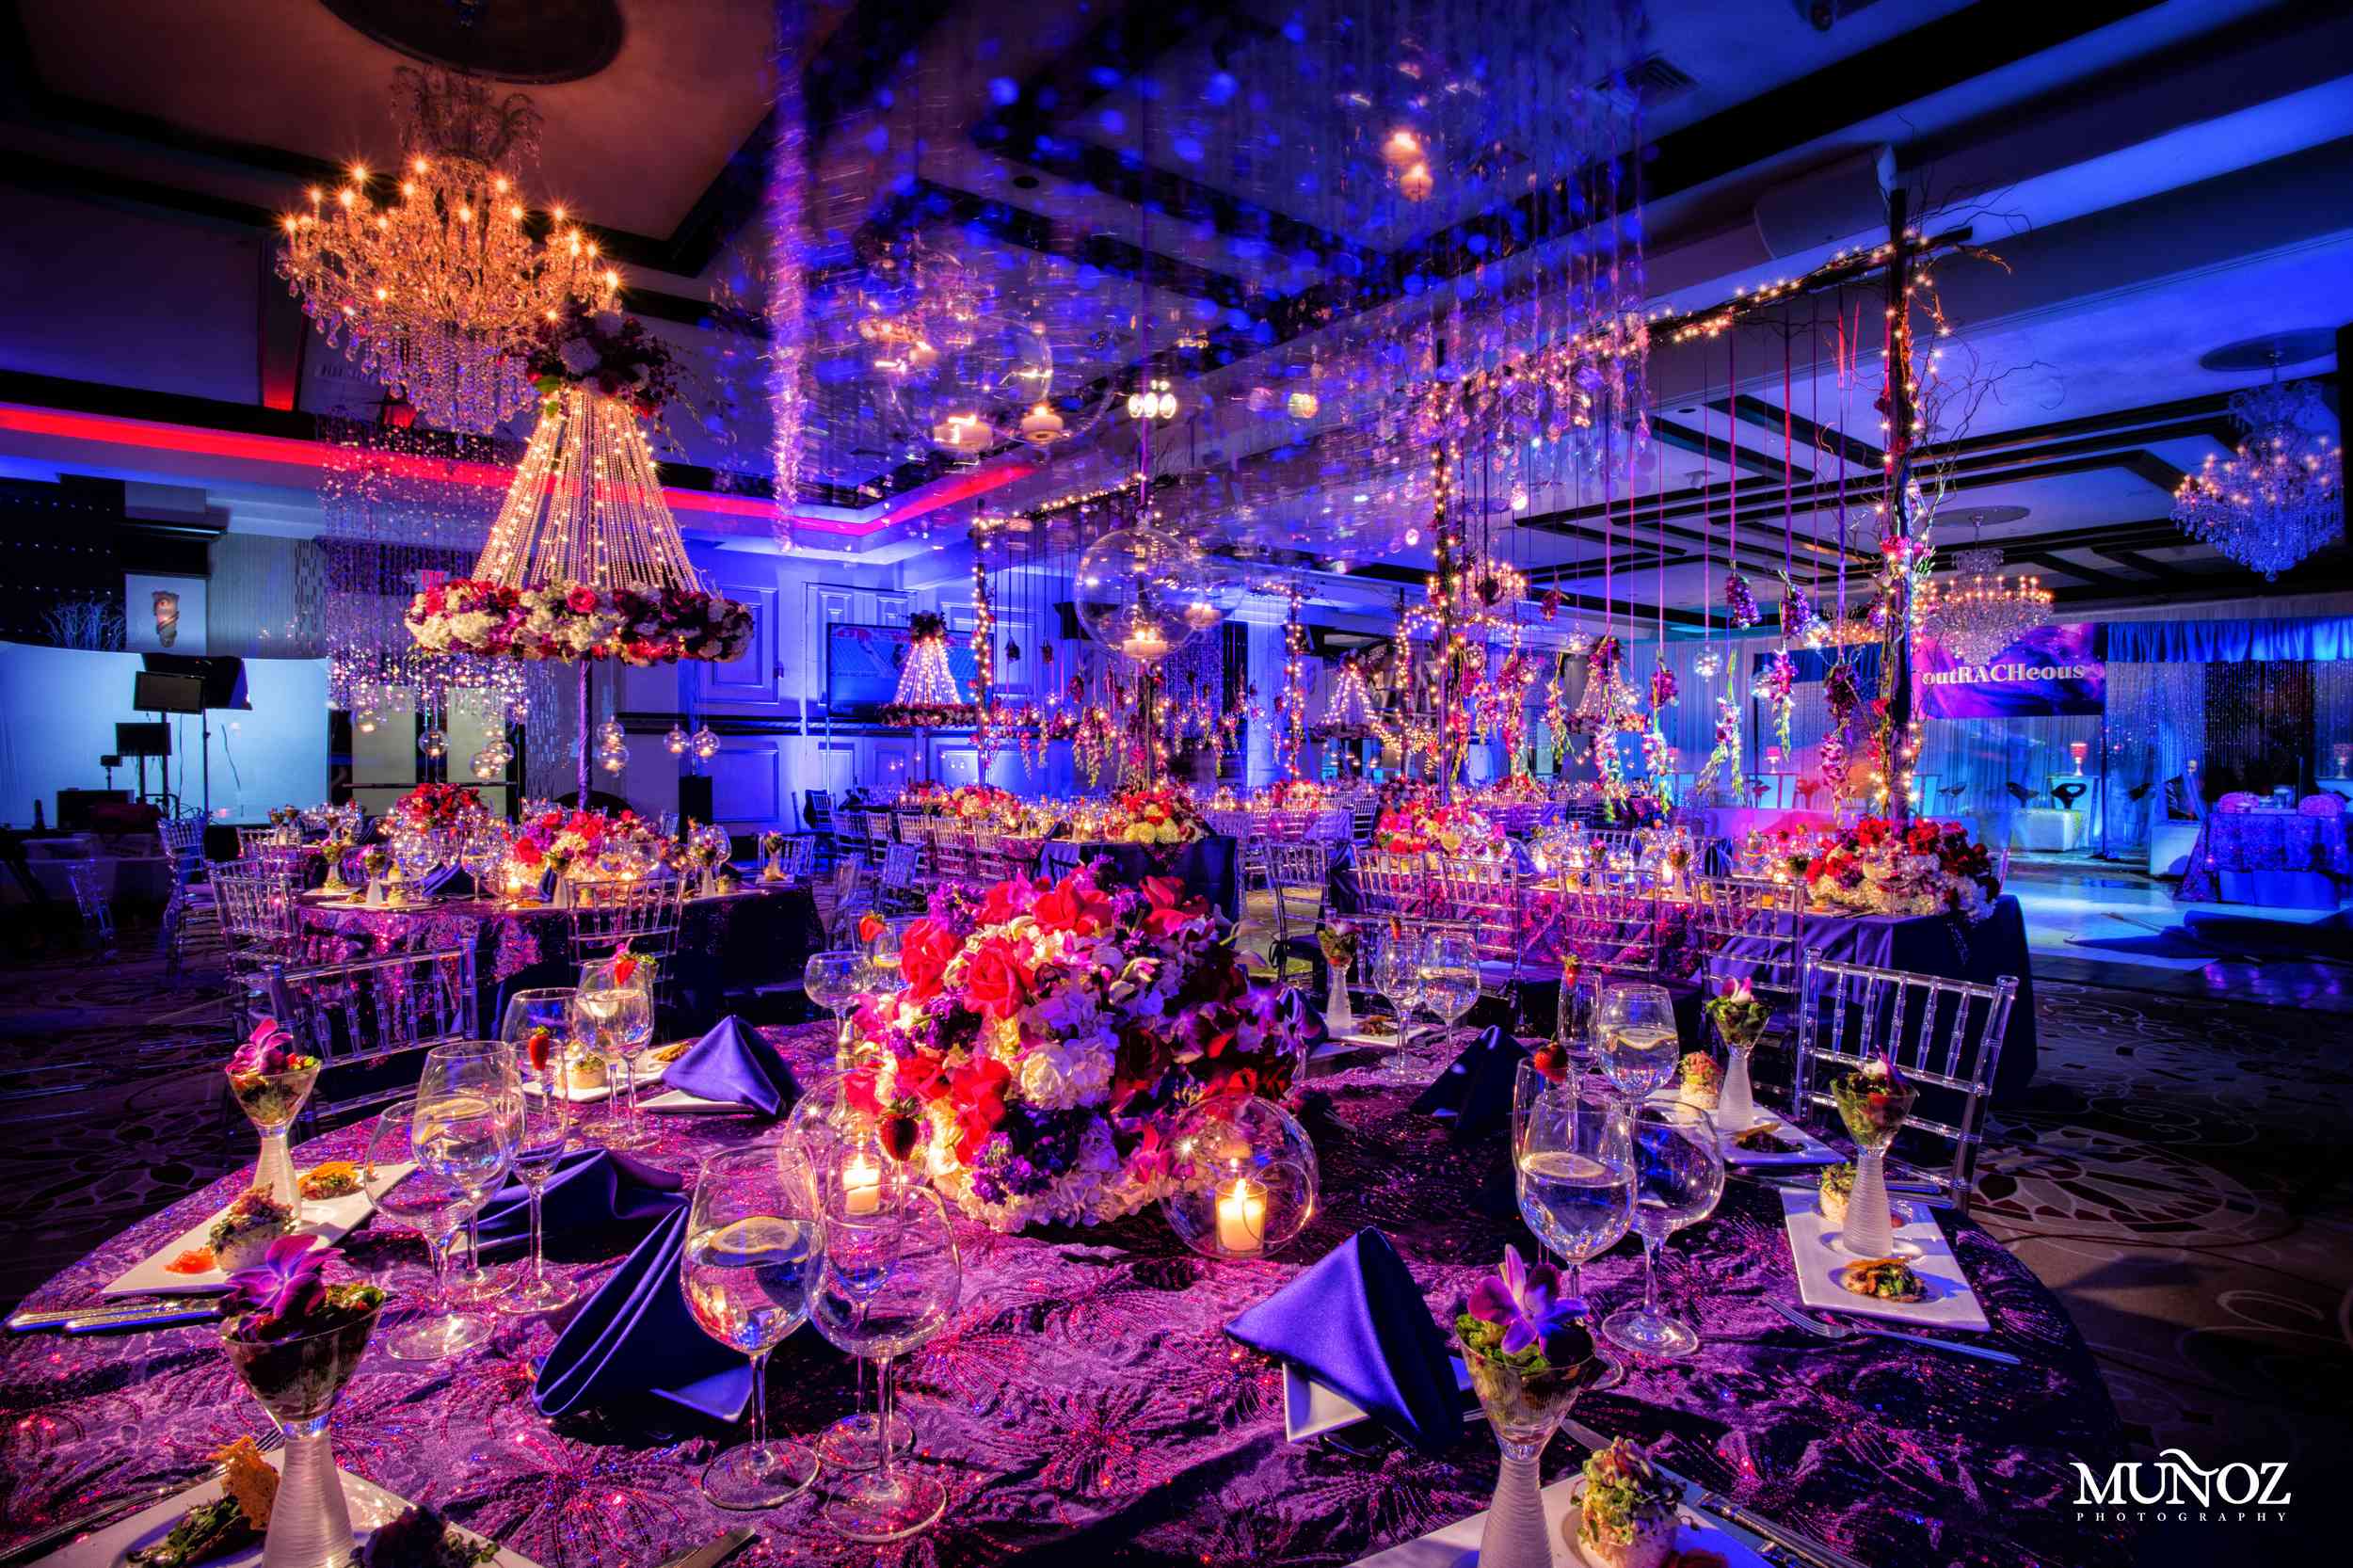 Juicy Couture Themed Bat Mitzvah